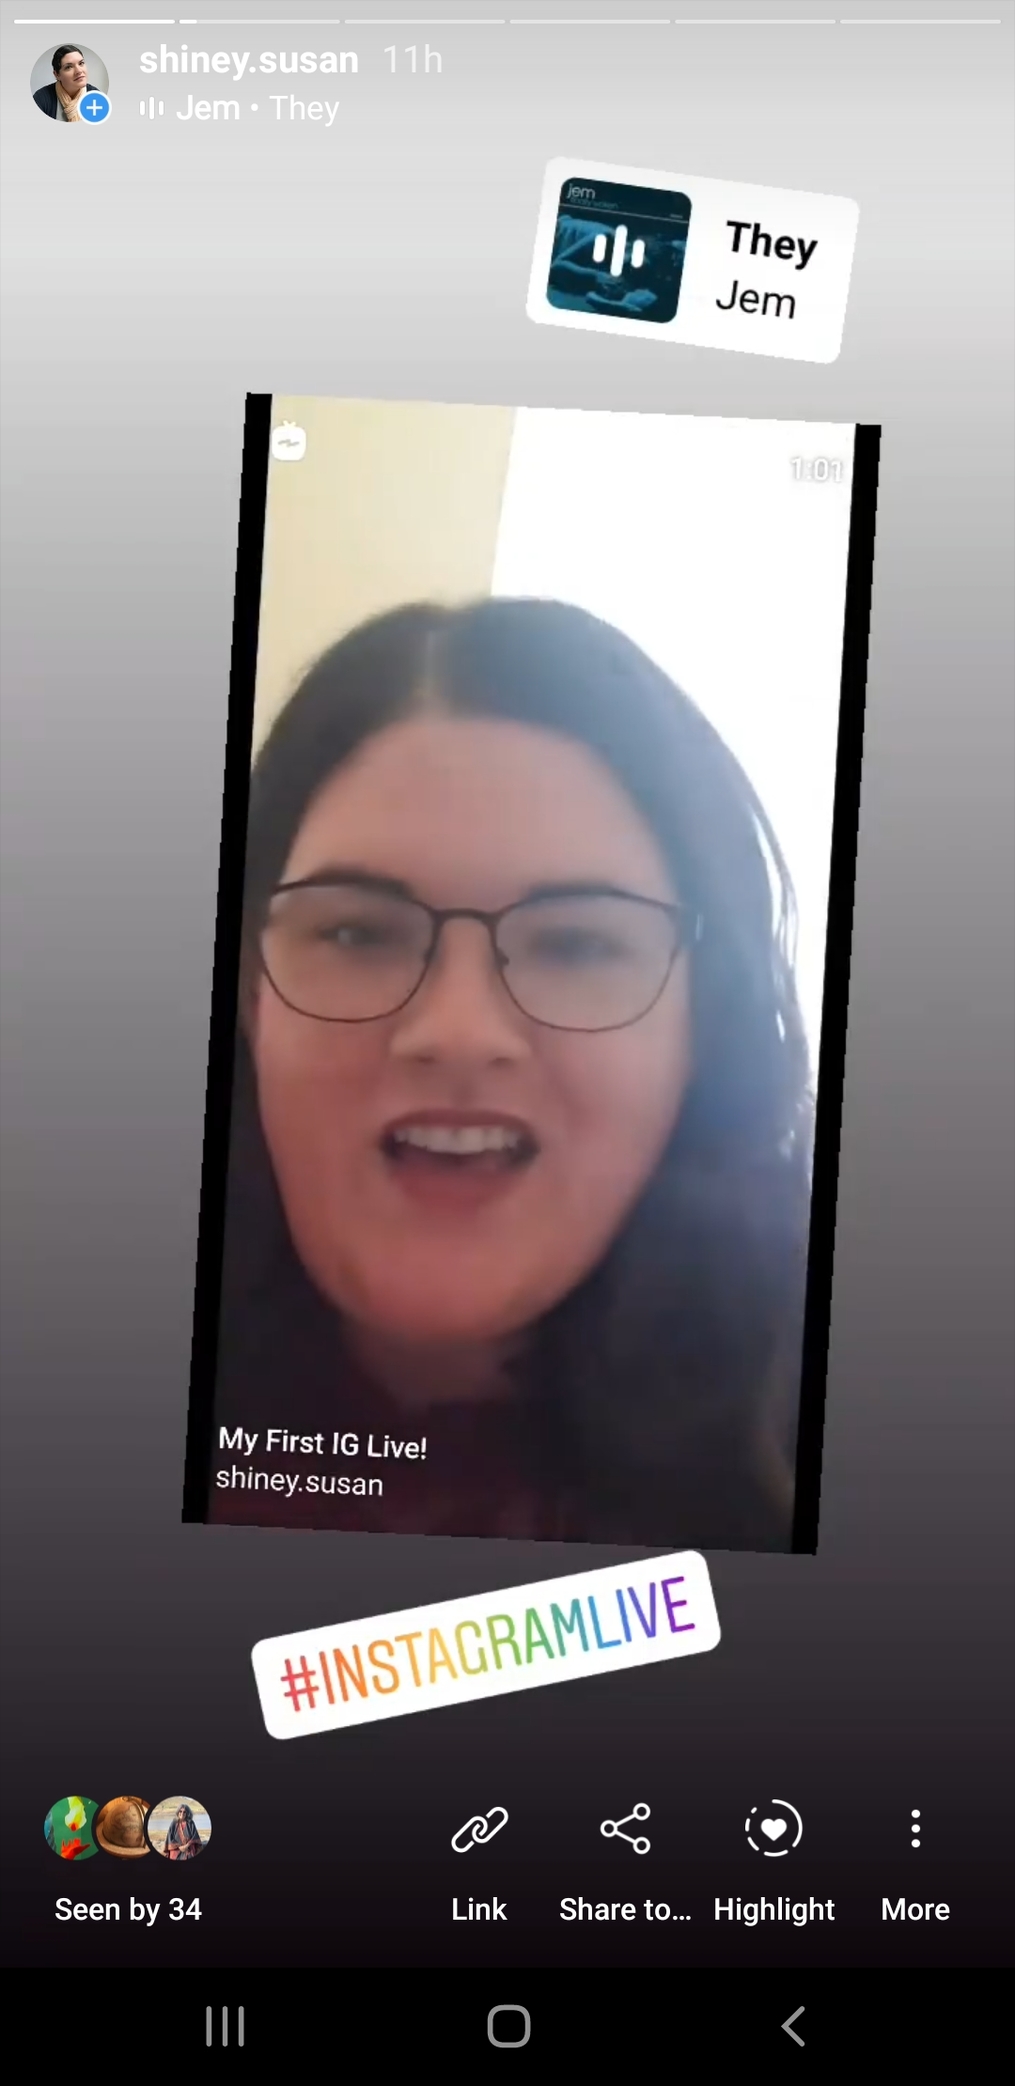 Using-a-livestream-video-as-an-Instagram-Story-with-a-hashtag-and-music-IG-Live-for-Writers-Instagram-Live-for-writers-susan-shiney-